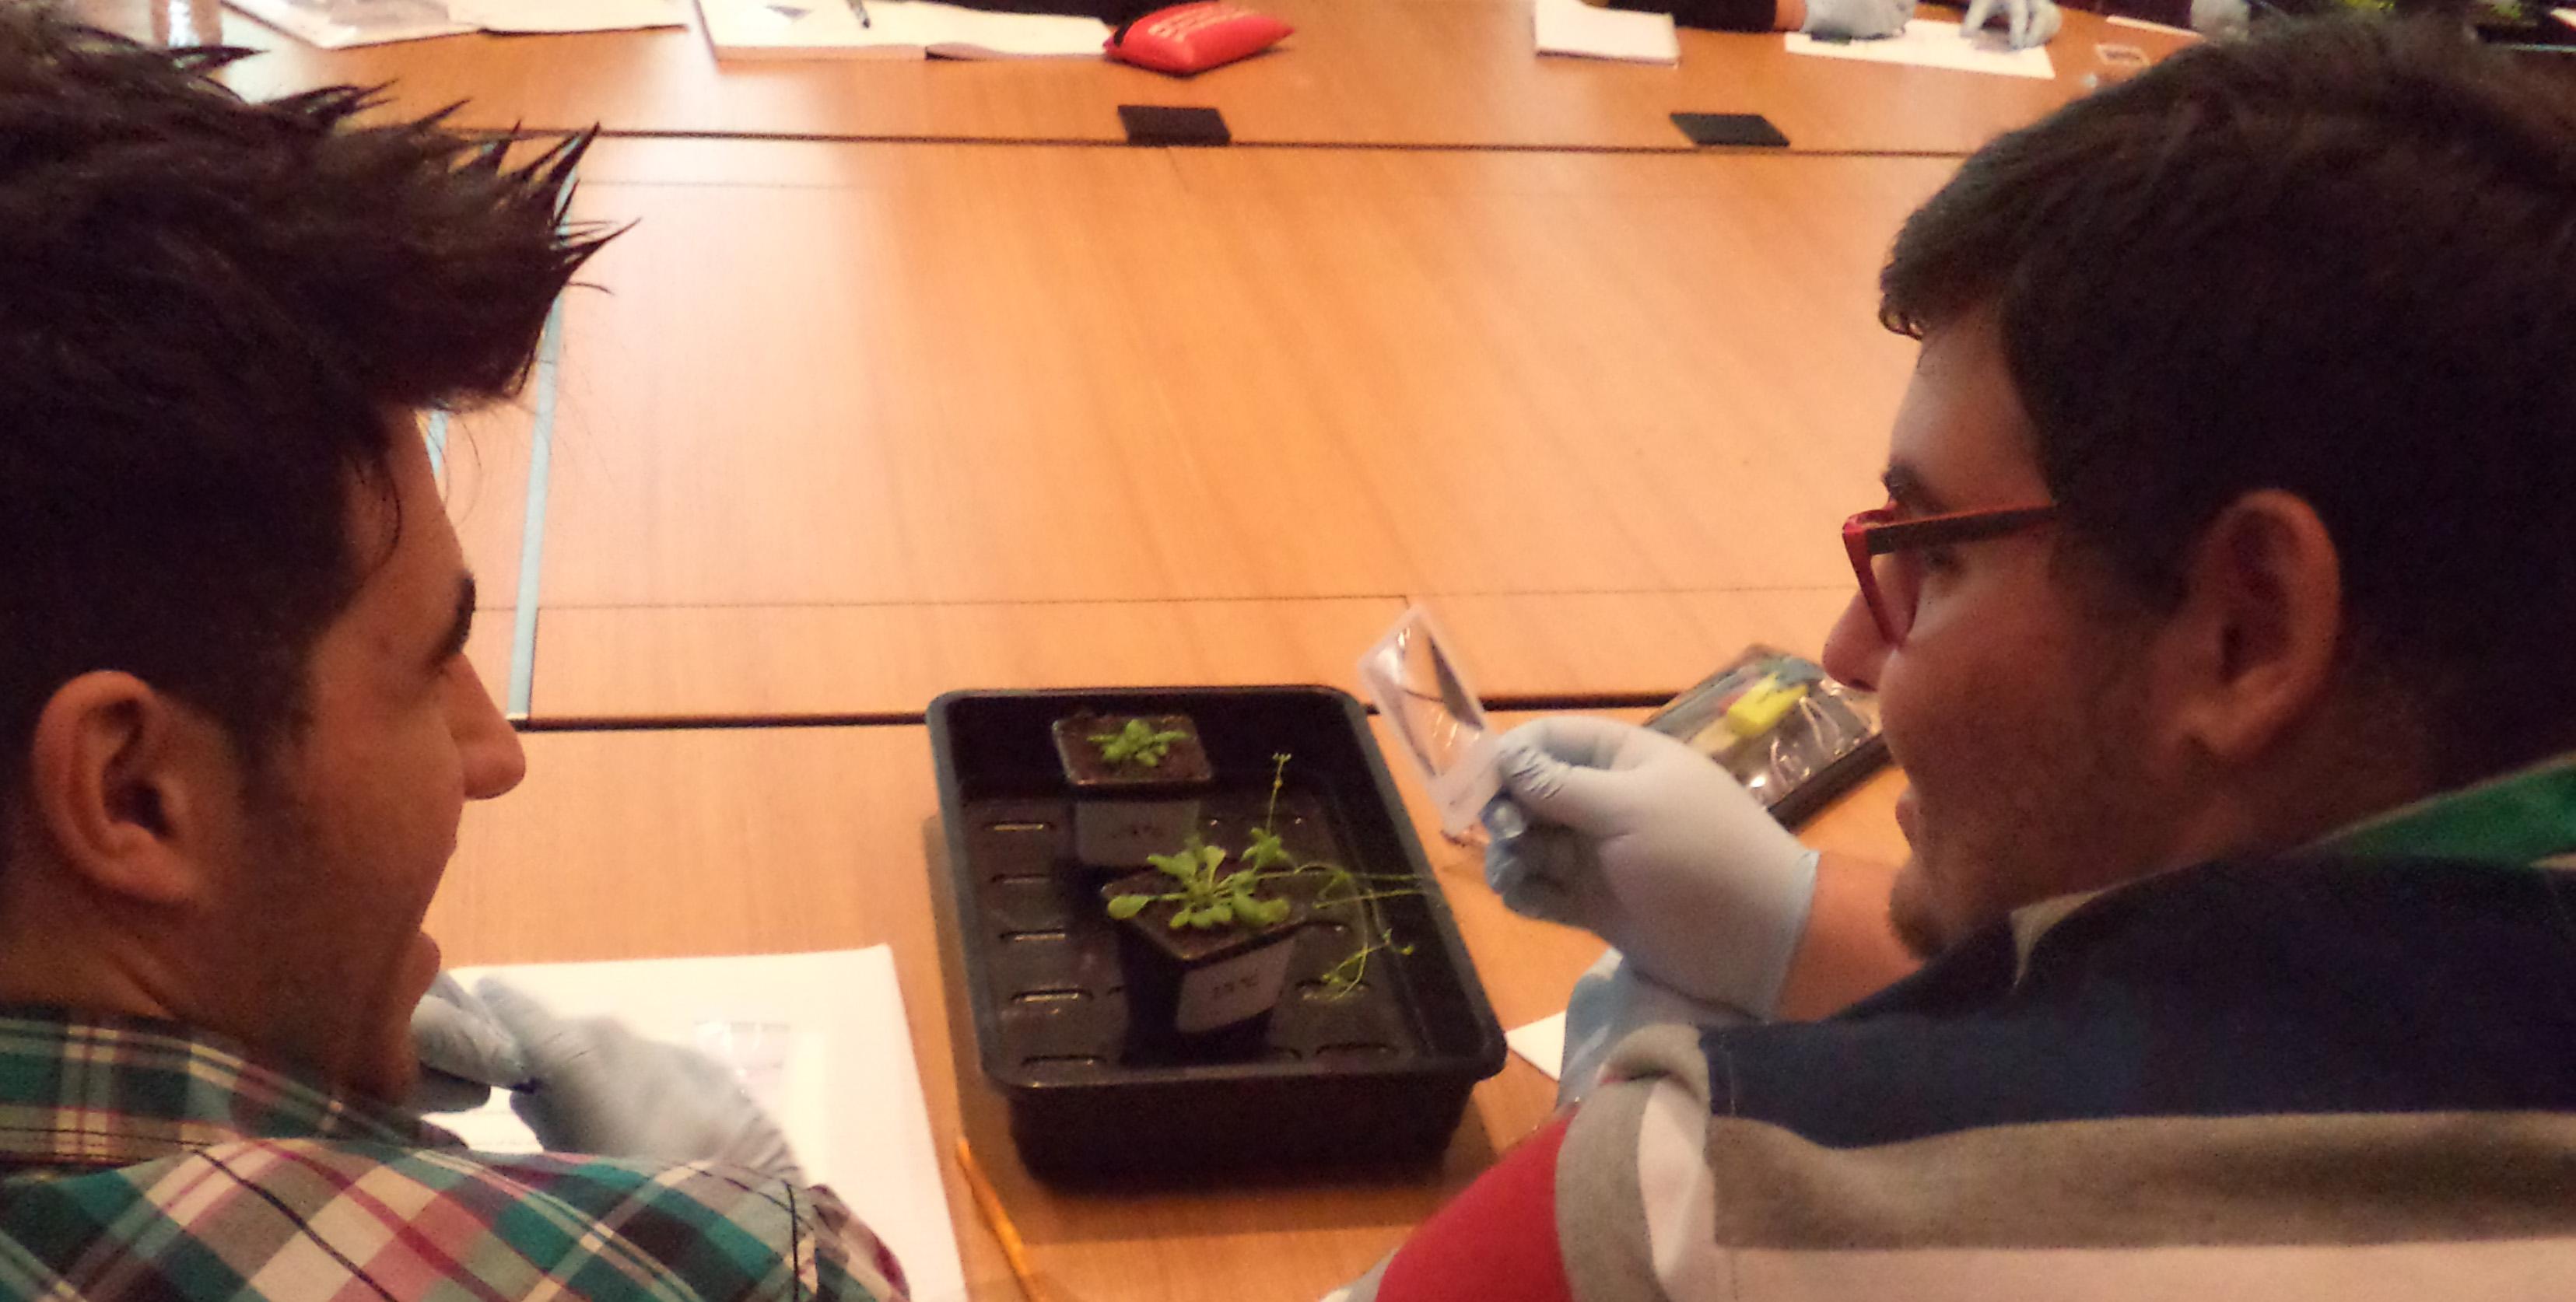 ‘This workshop really opened my eyes to the opportunities in plant sciences!’